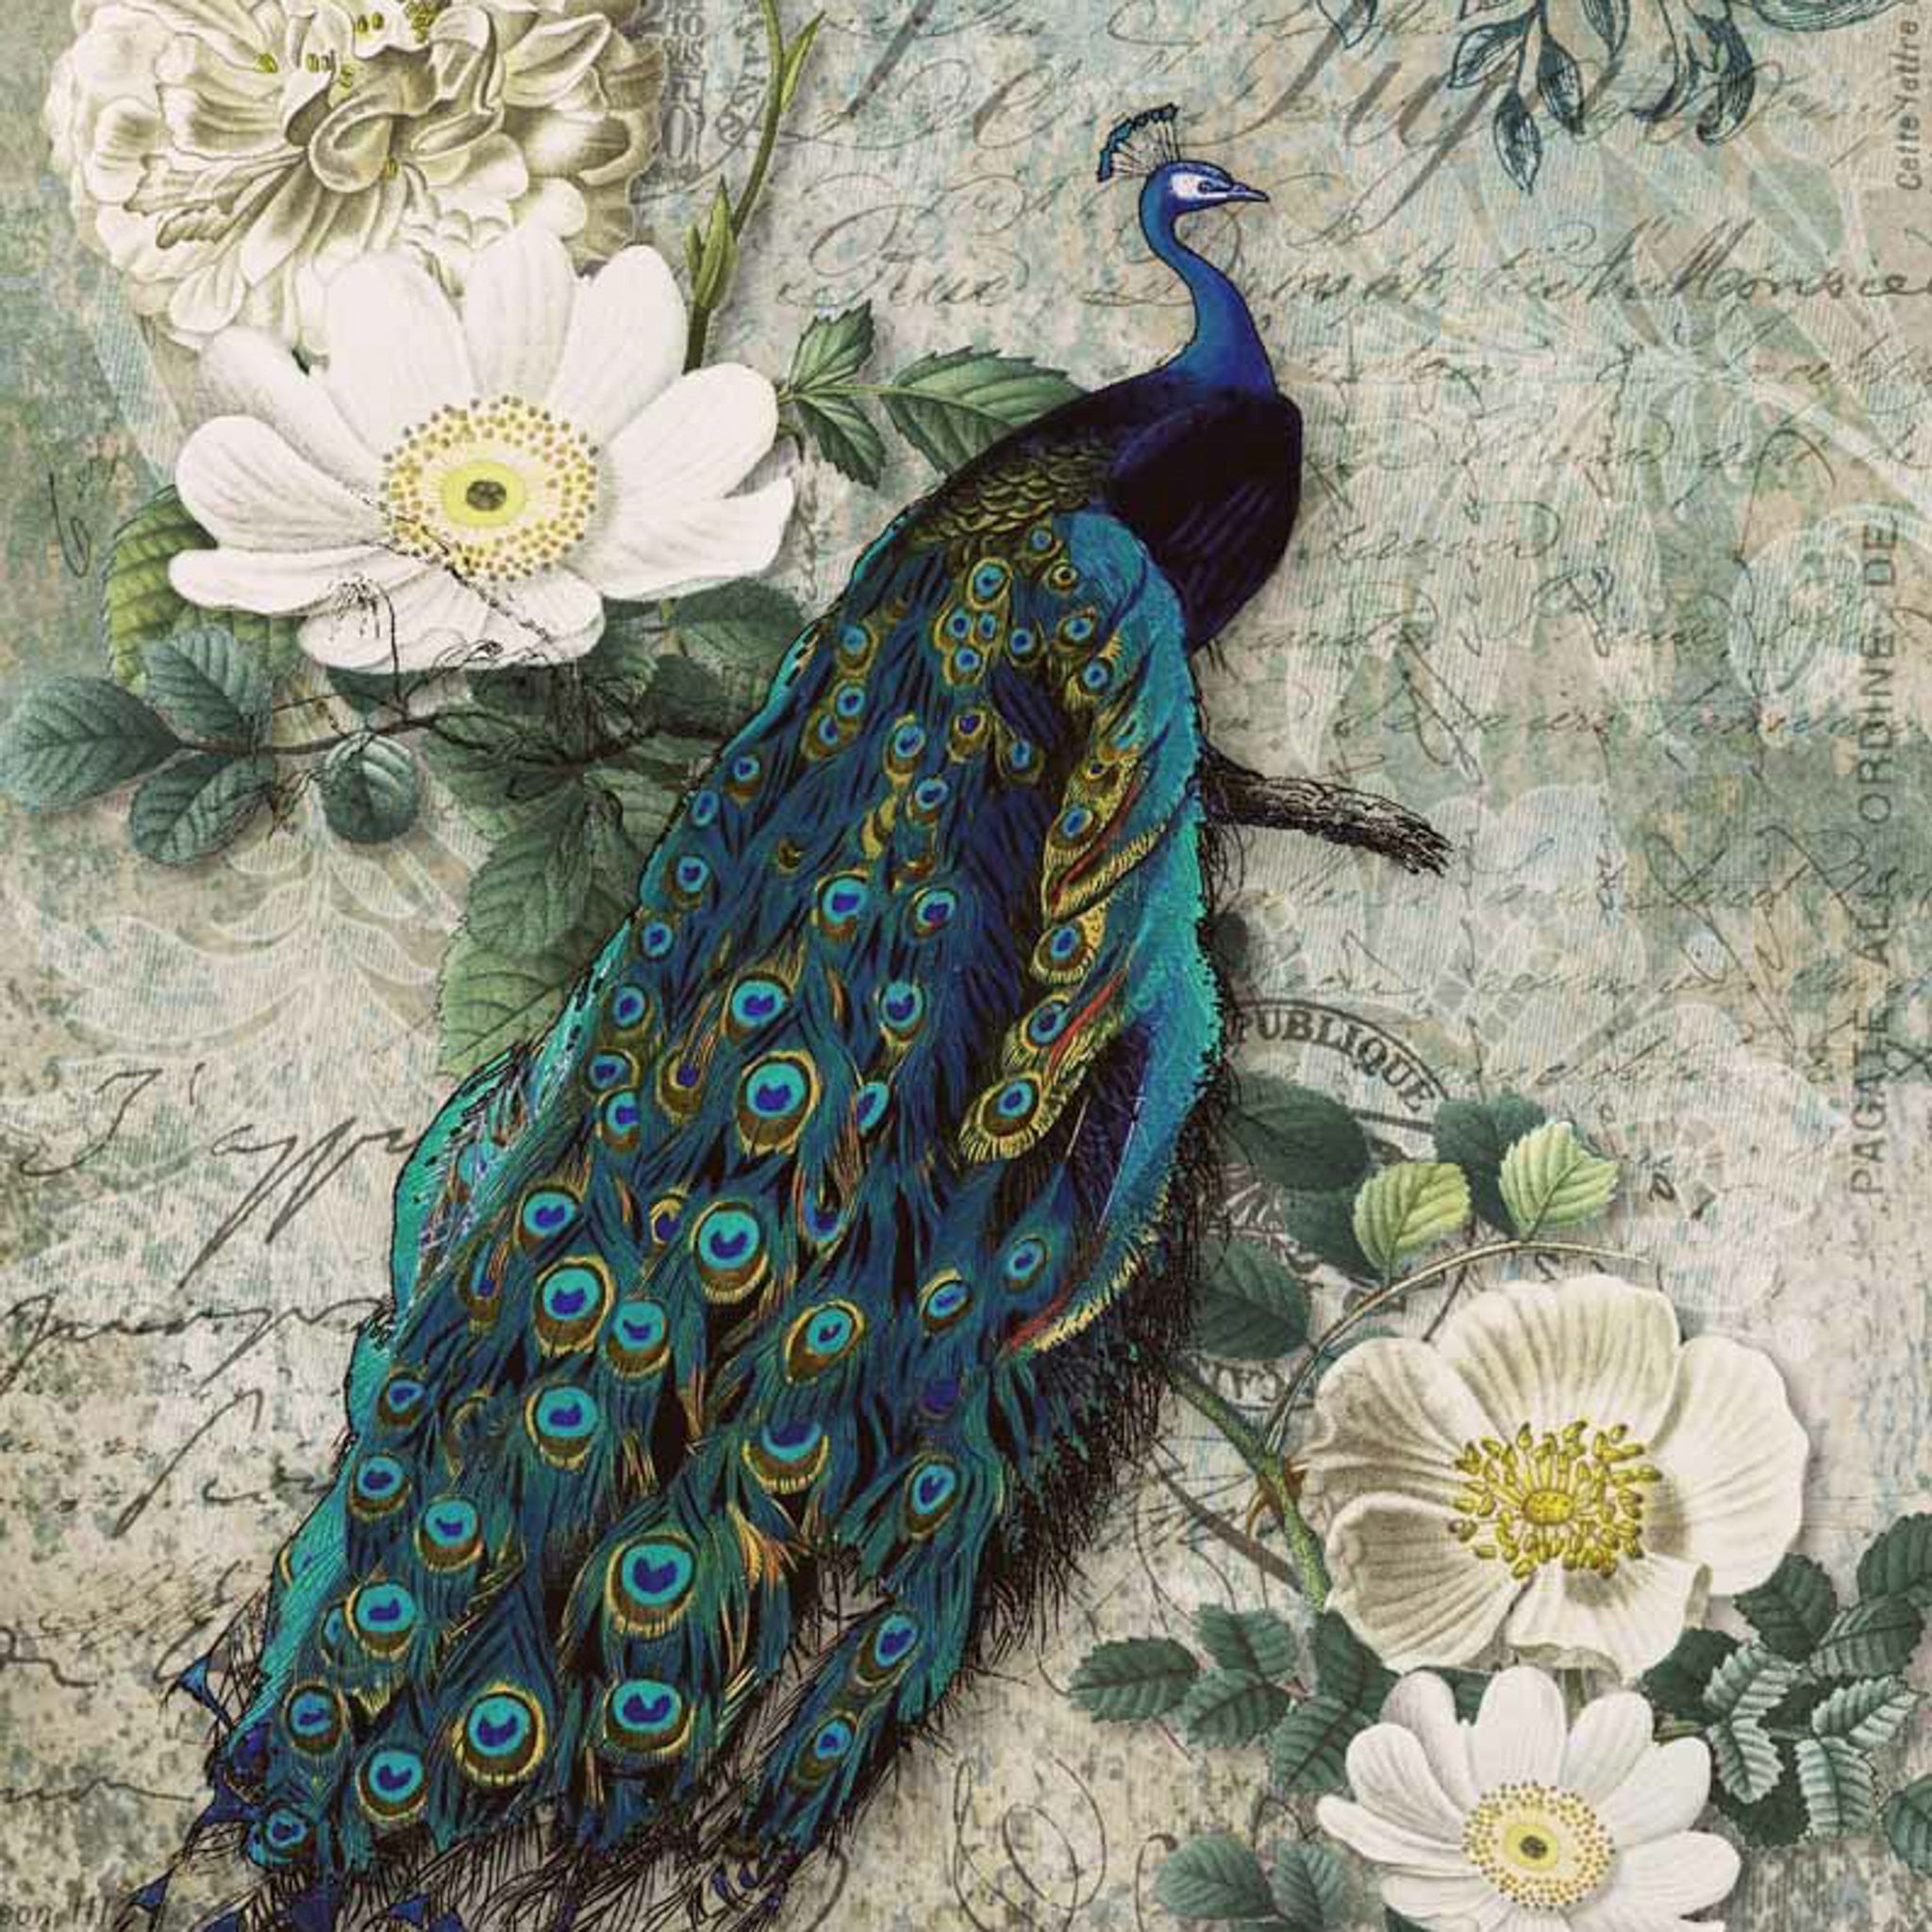 A2 rice paper design that features a large peacock on a branch with green foliage and white flowers against a vintage parchment background with a lace border at the top.